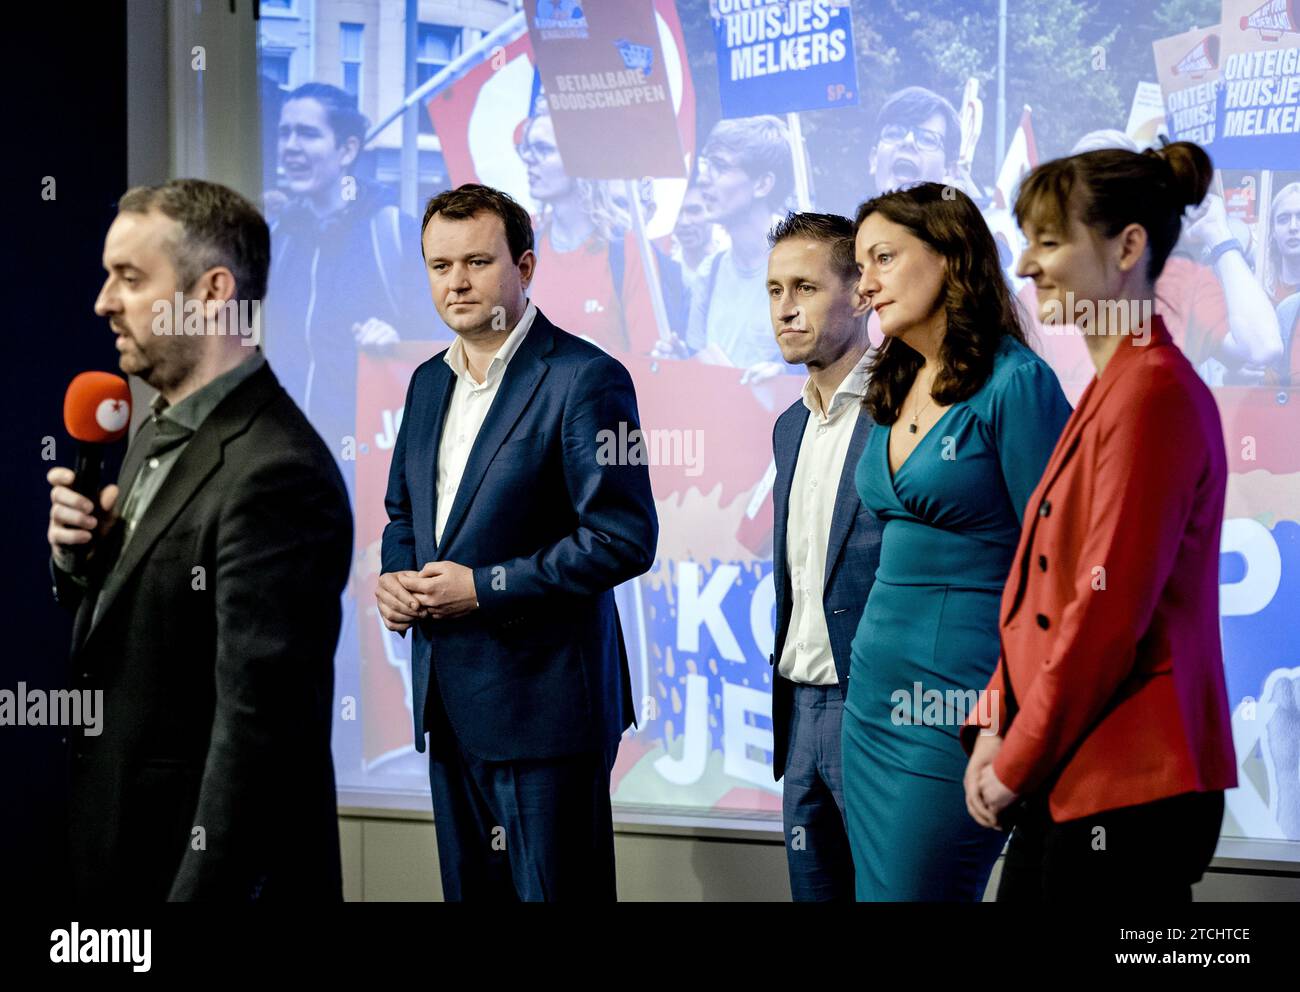 THE HAGUE - (L-R) Jimmy Dijk, Bart van Kent, Michiel van Nispen and Sandra Beckerman announce the new SP party leader. Marijnissen is resigning as party leader and MP of the SP. The disappointing election result for the party is the reason for her departure. ANP REMKO DE WAAL netherlands out - belgium out Stock Photo